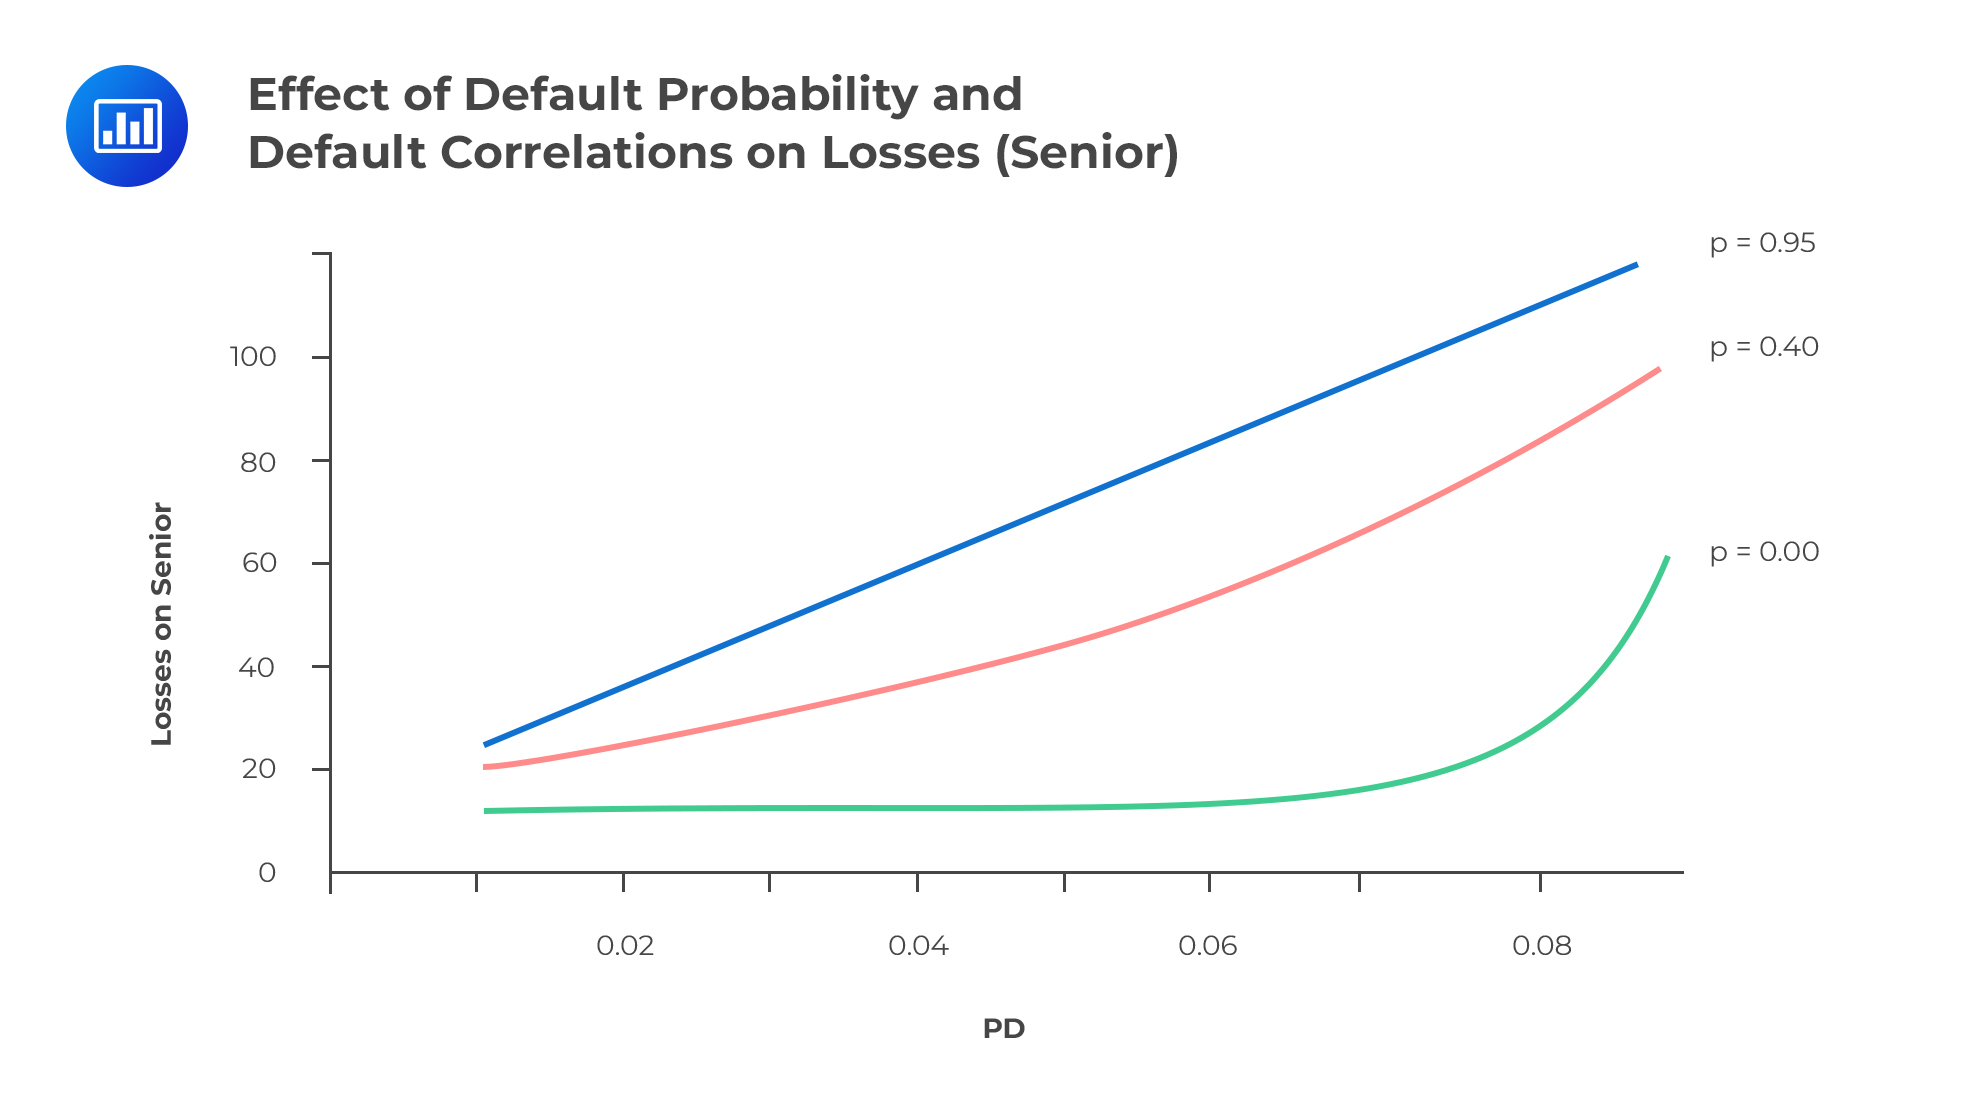 Effect of Default Probability and Default Correlations on Losses (Senior)